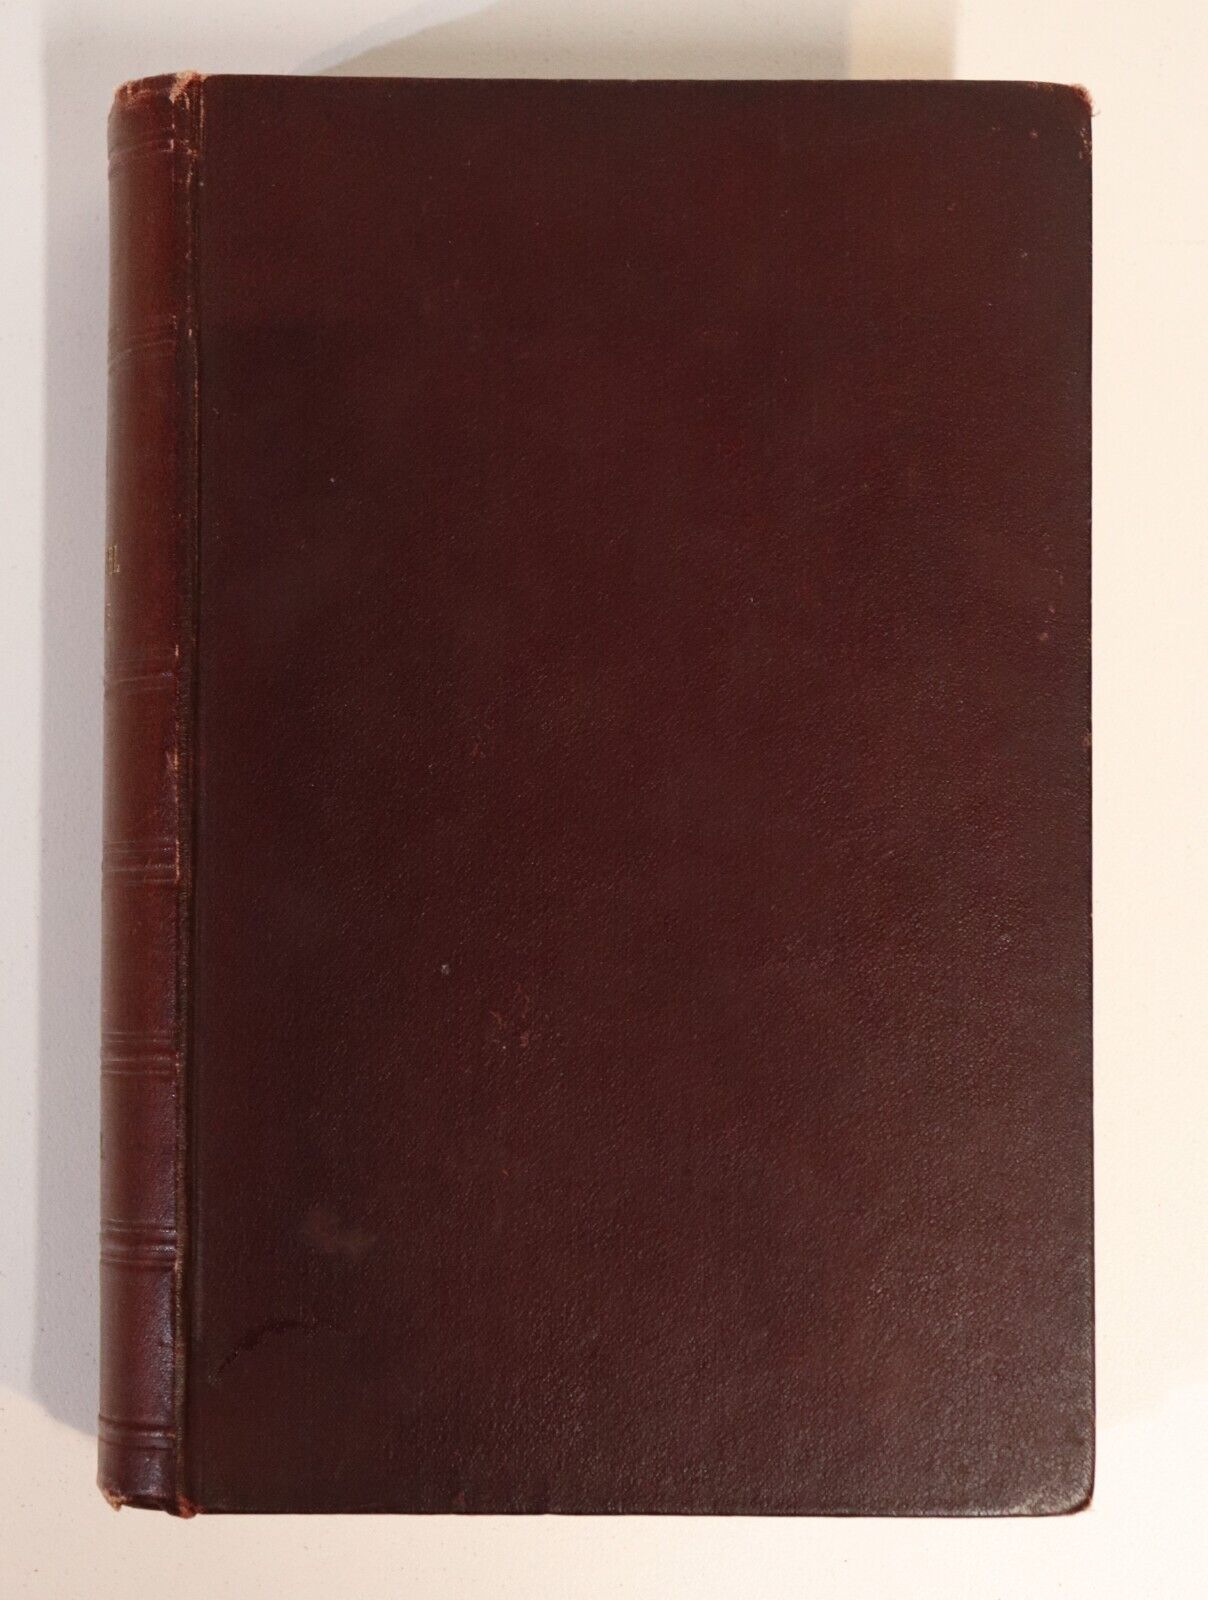 Journal Of The Iron & Steel Institute - 1914 - Antique History Book